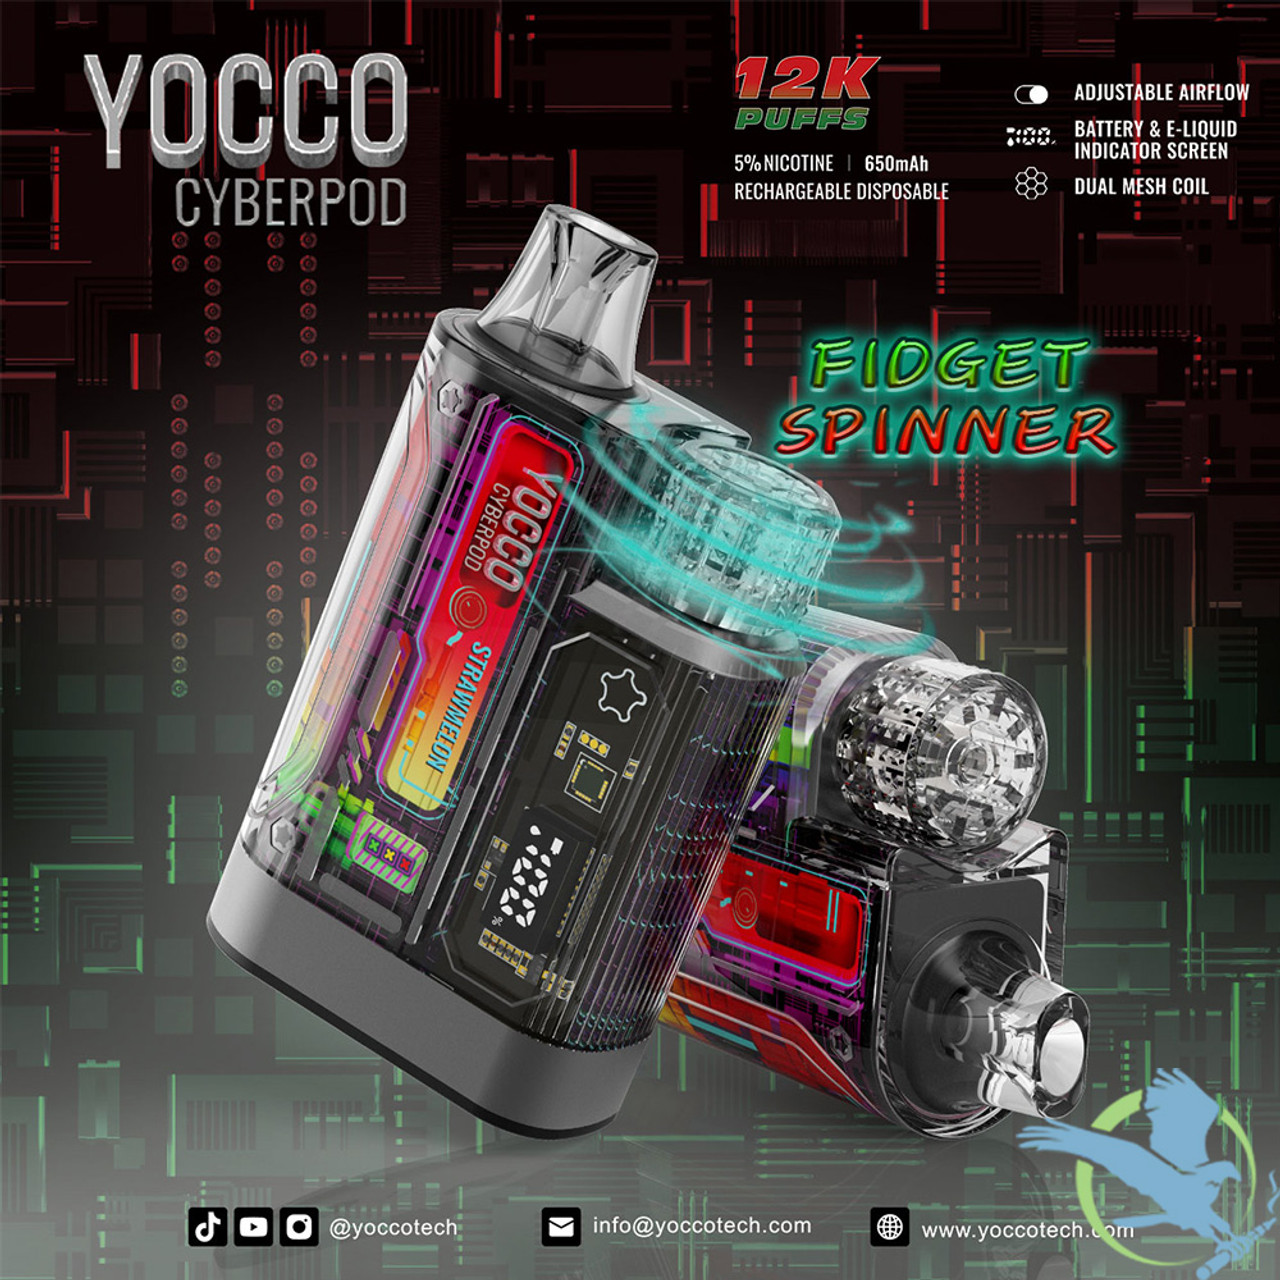 https://cdn11.bigcommerce.com/s-964anr/images/stencil/1280x1280/products/24220/122472/Yocco-Cyberpod-12000-Puffs-20ML-650mAh-Prefilled-Nicotine-Salt-Rechargeable-Disposable-Vape-Device-With-Dual-Mesh-Coil--Battery--E-liquid-Indicator-Screen---Display-of-10---Wholesale-2__75662.1701407128.jpg?c=2